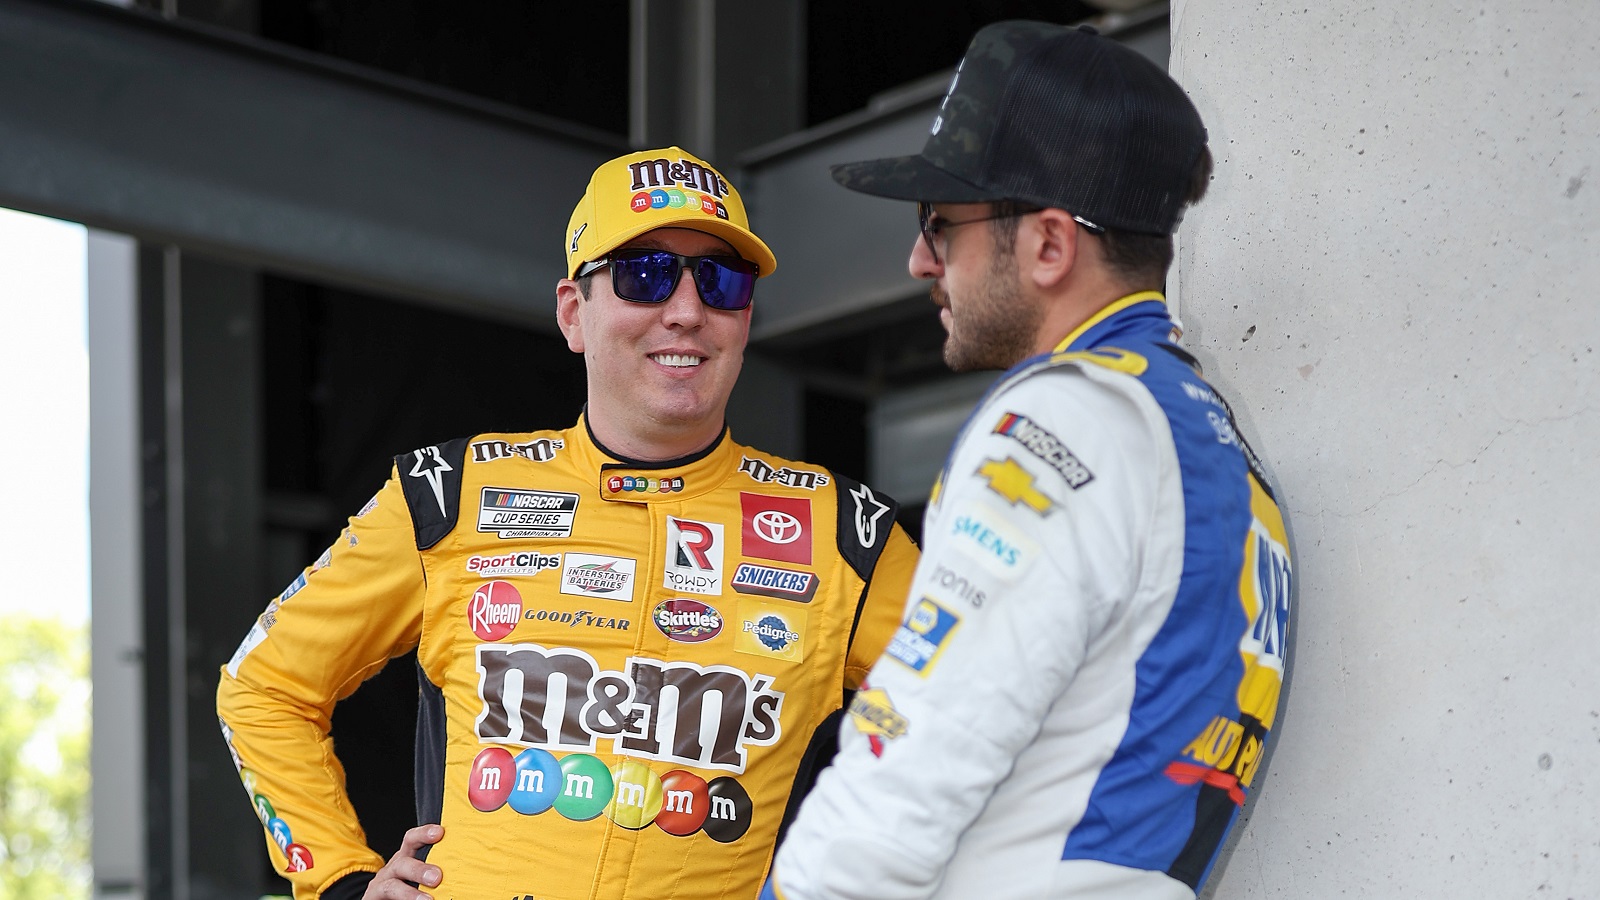 Kyle Busch and Chase Elliott talk prior to the NASCAR Cup Series Verizon 200 at the Brickyard at Indianapolis Motor Speedway on July 31, 2022.